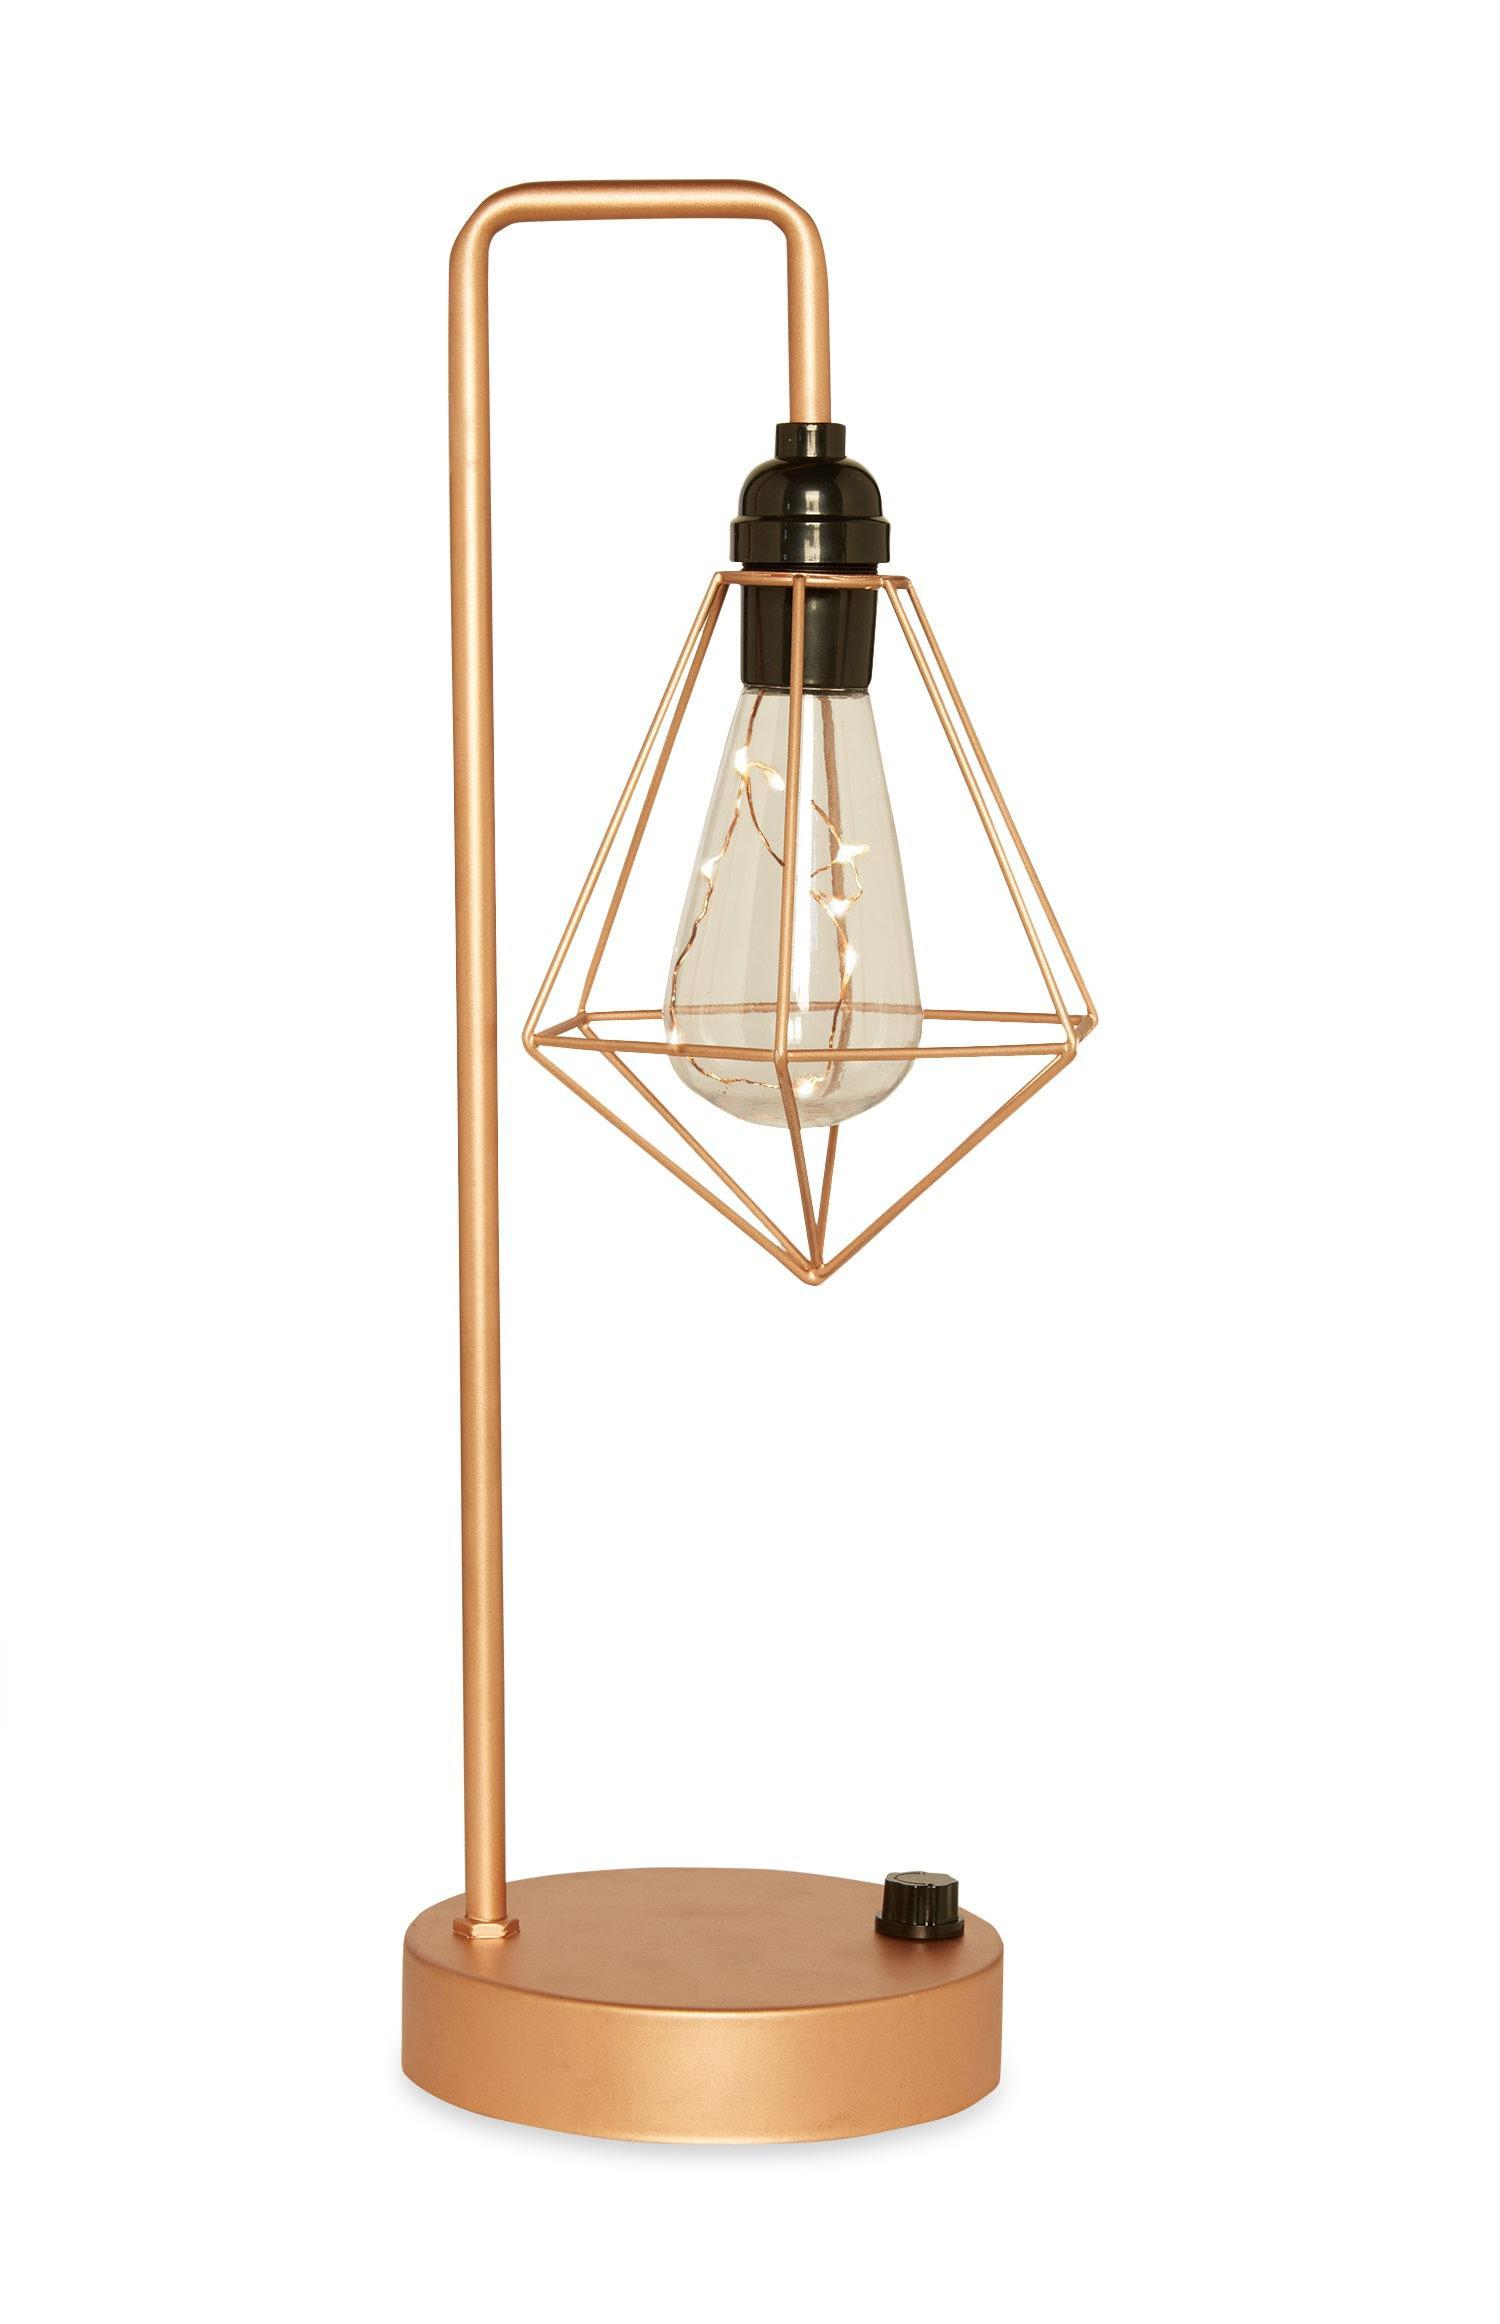 Primark Is Selling This Gorgeous Copper Desk Lamp And Its throughout sizing 1500 X 2324